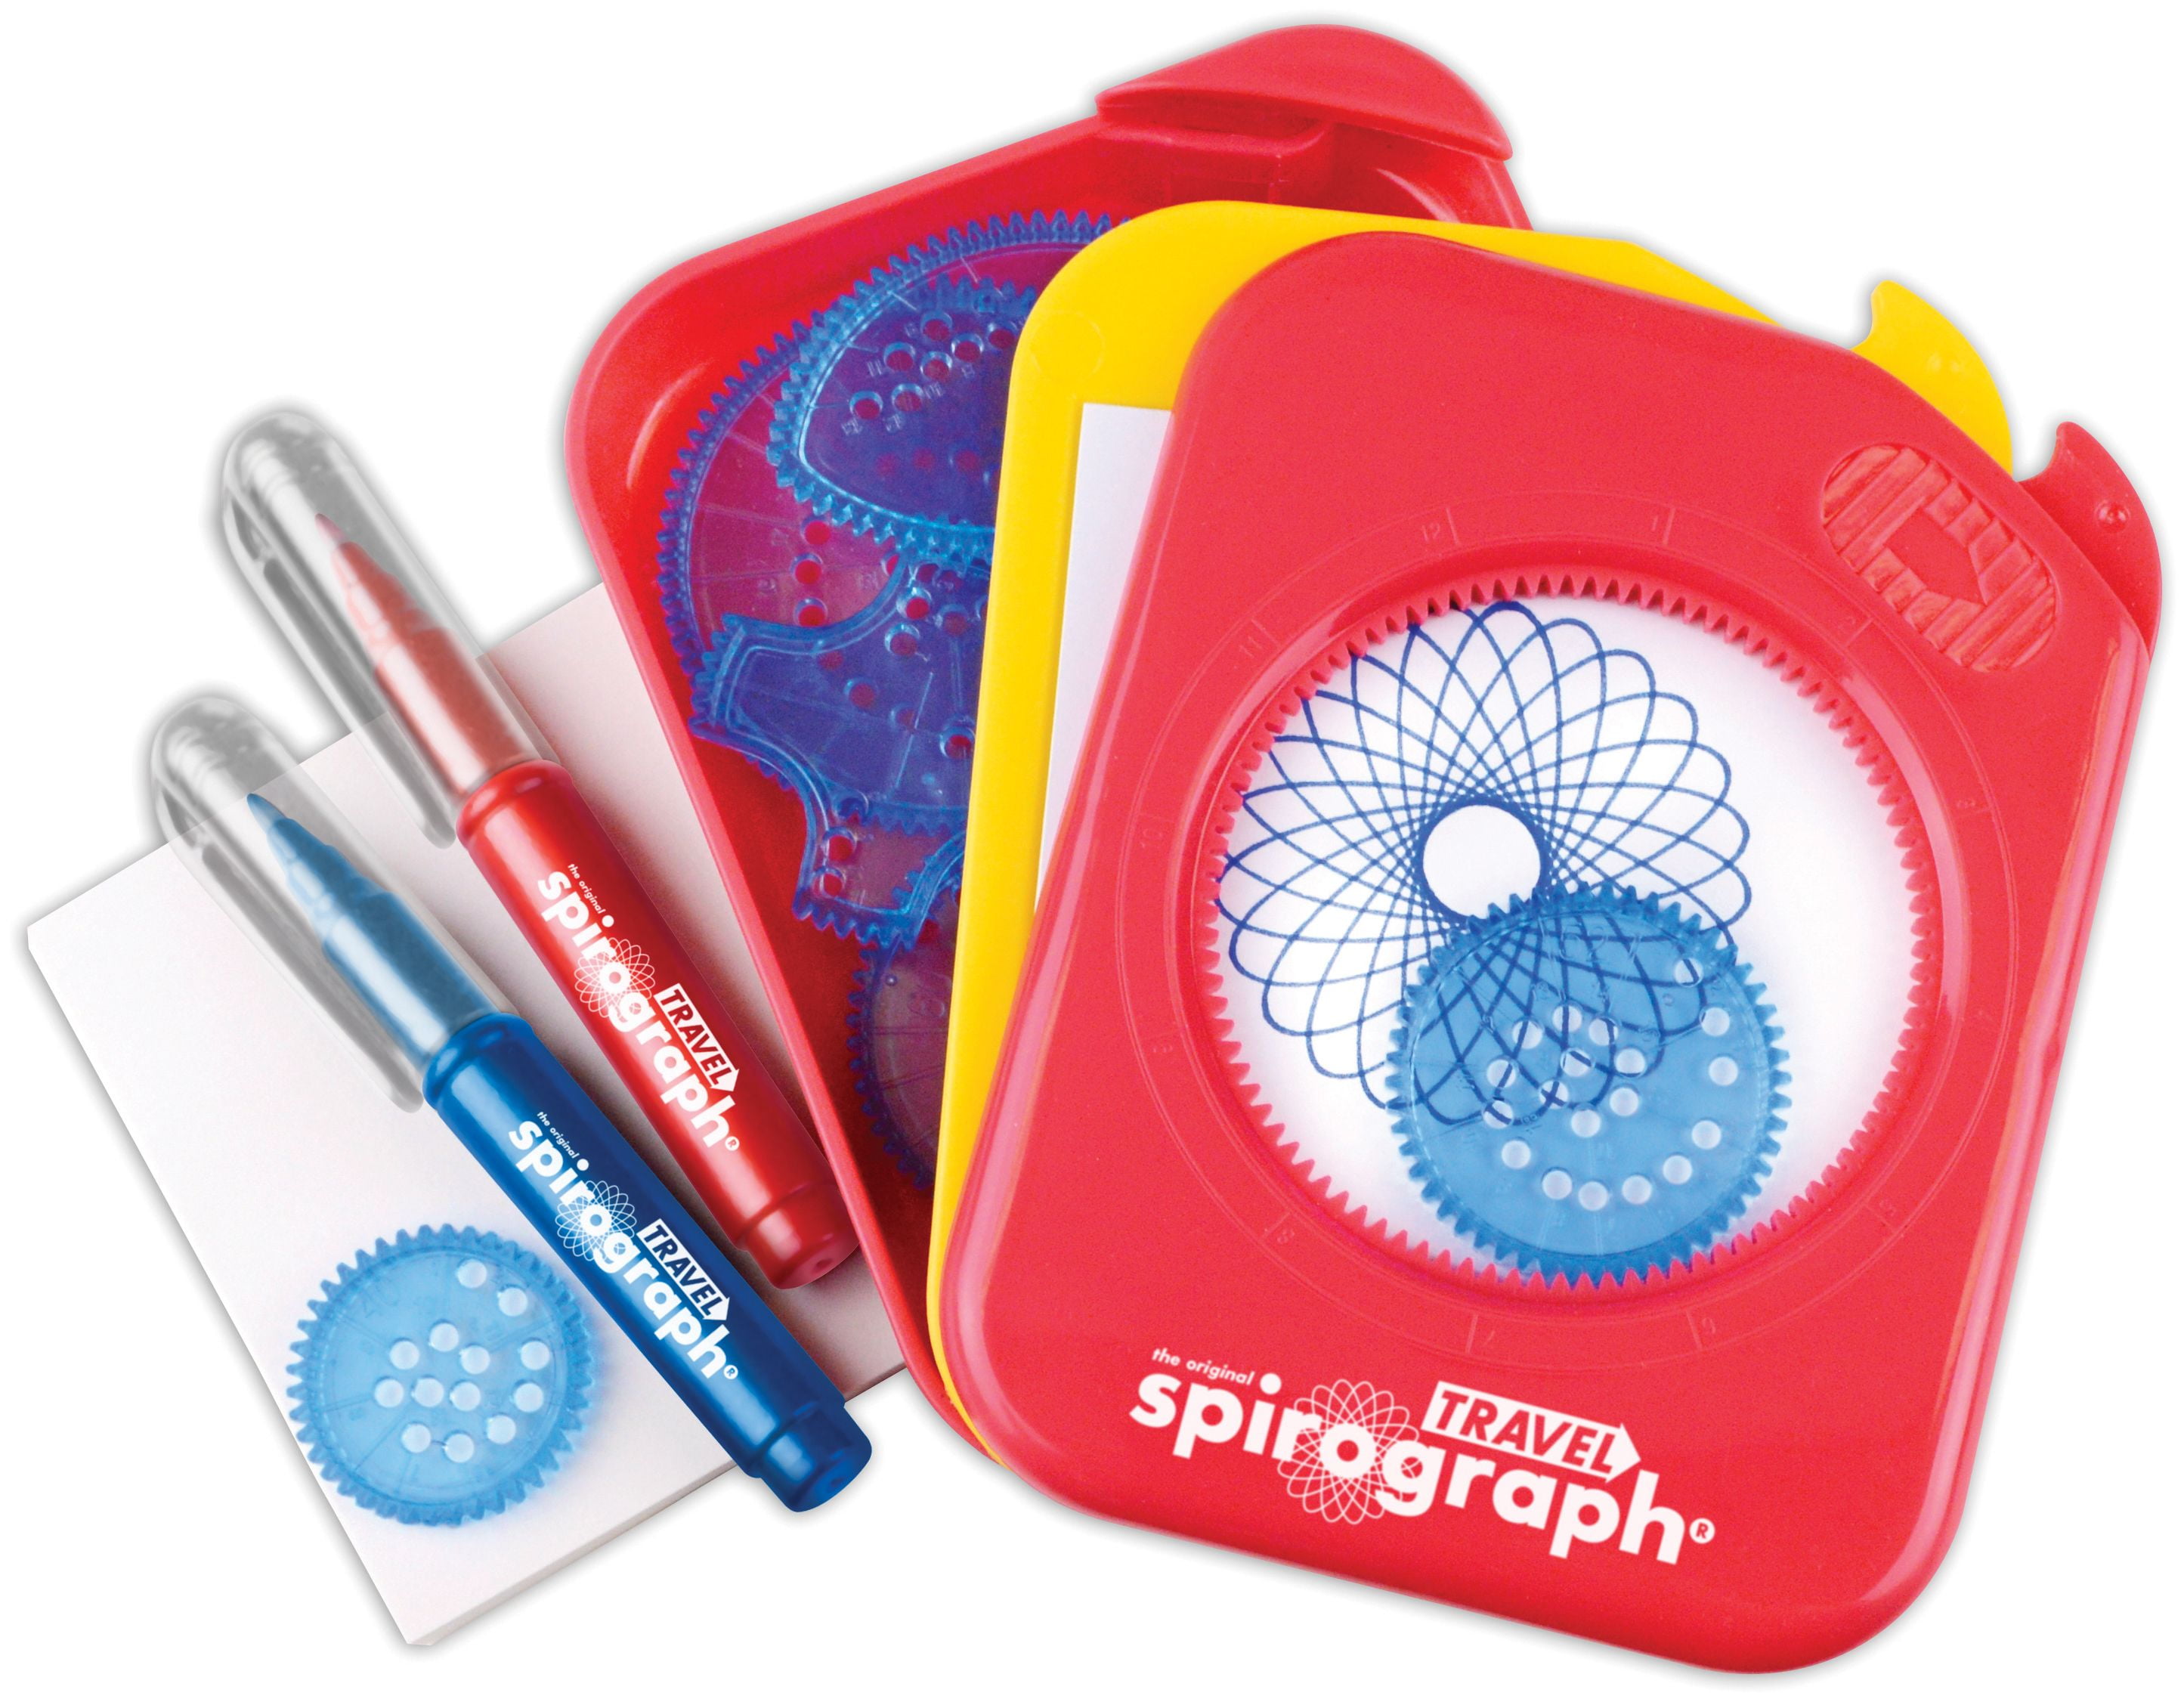 Travel Spirograph- the Classic Go Anywhere Design Toy 